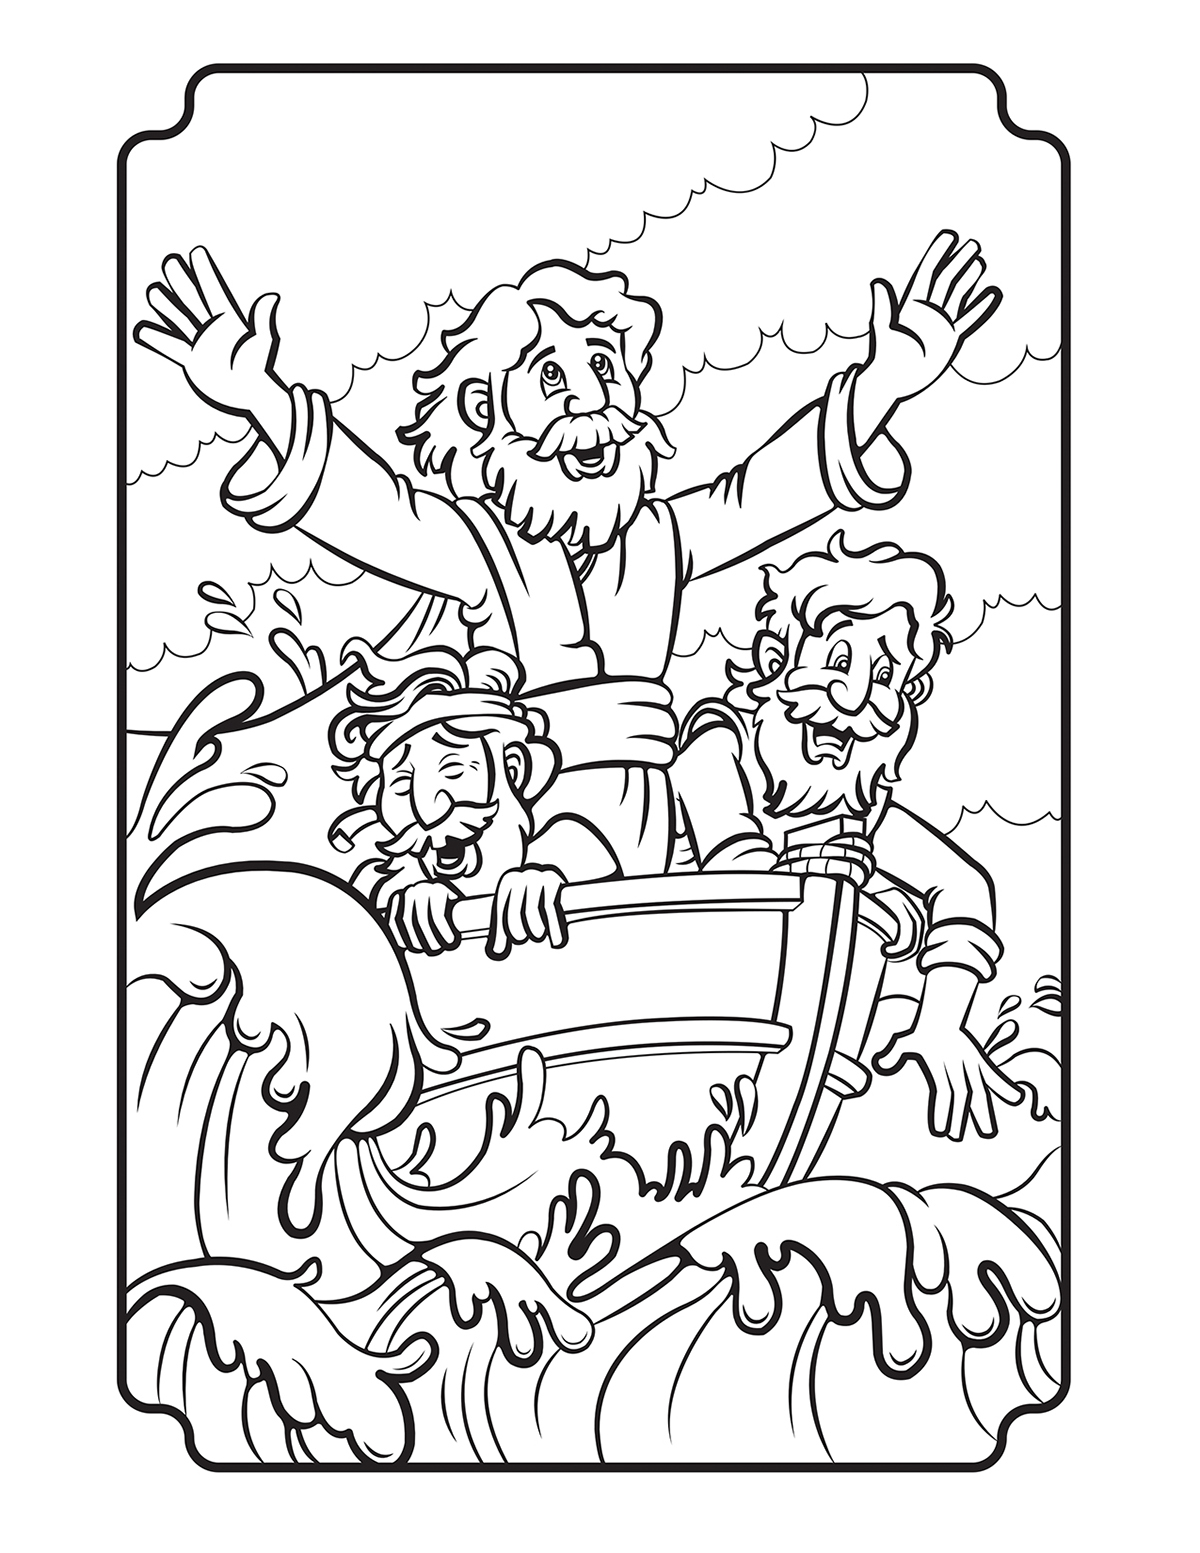 Bible Story Coloring Pages on Behance